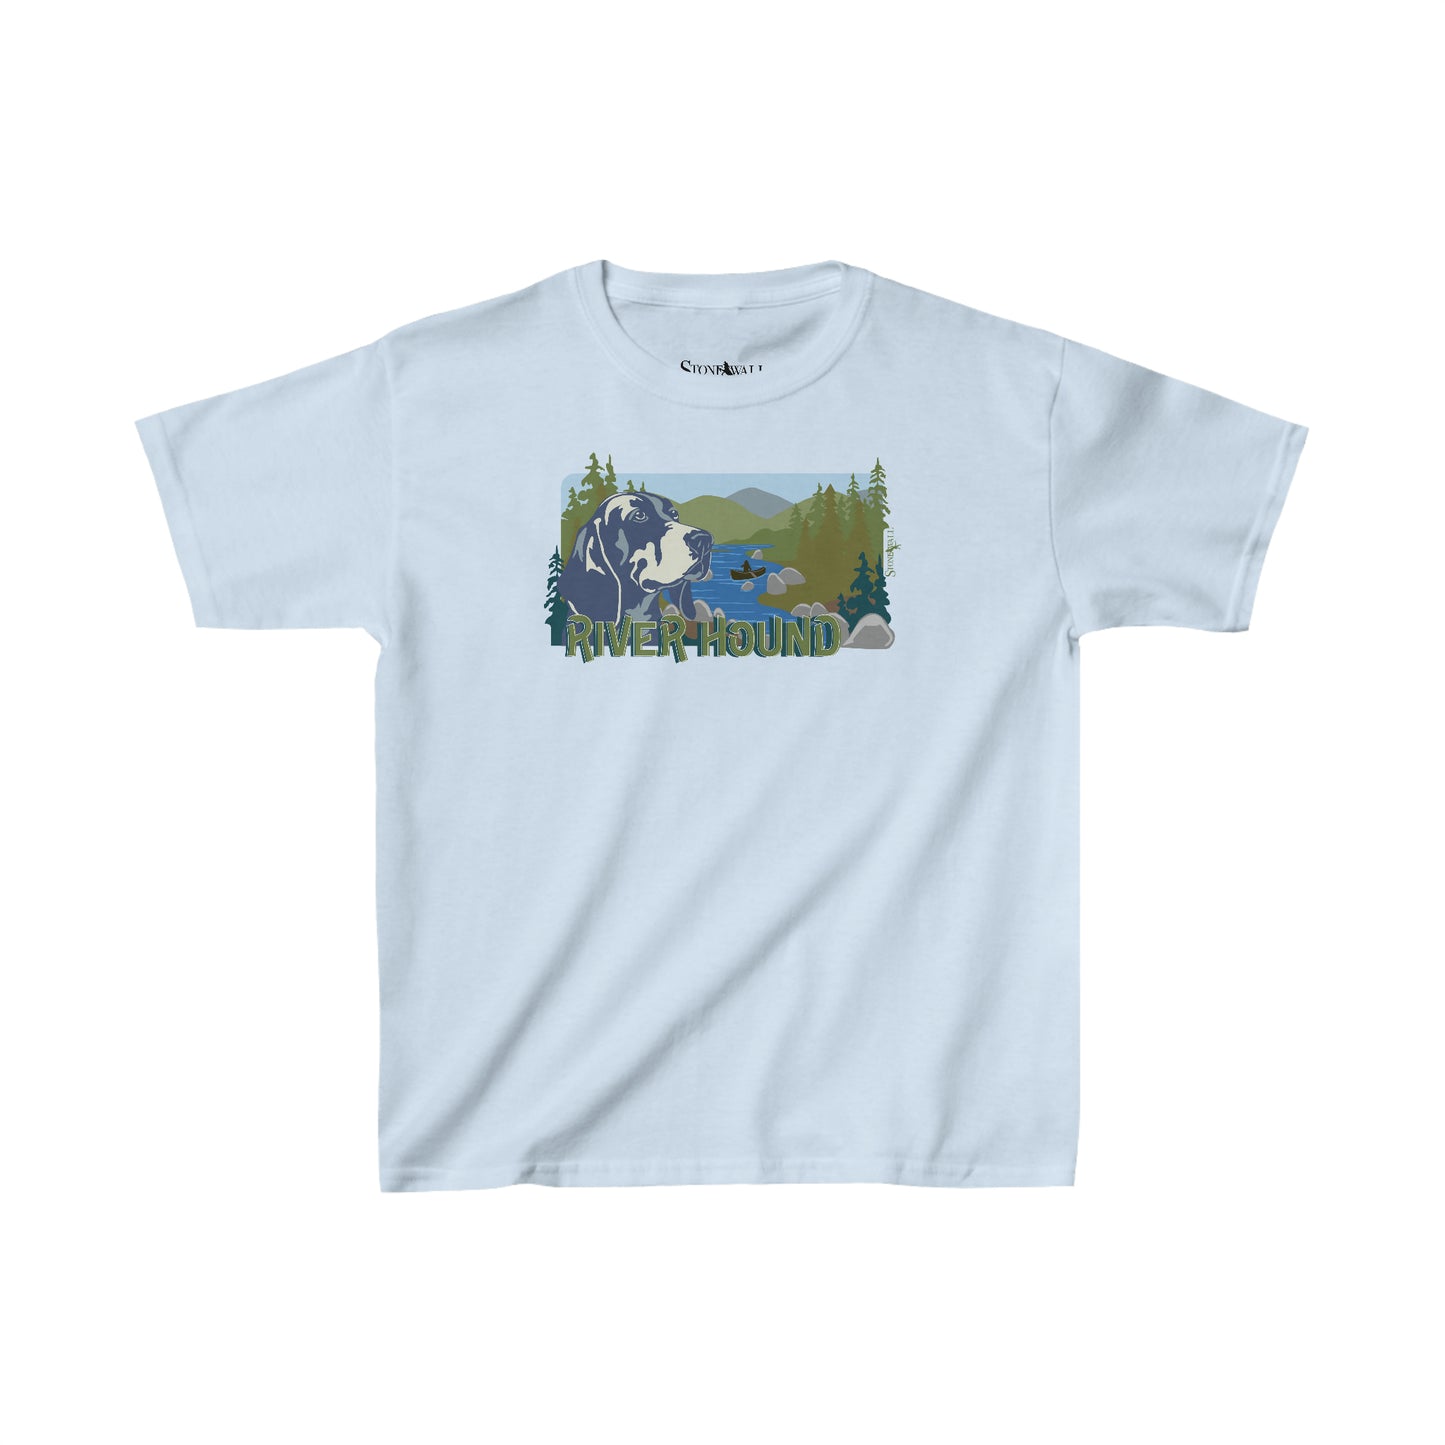 Youth- River Hound- Light blue tee